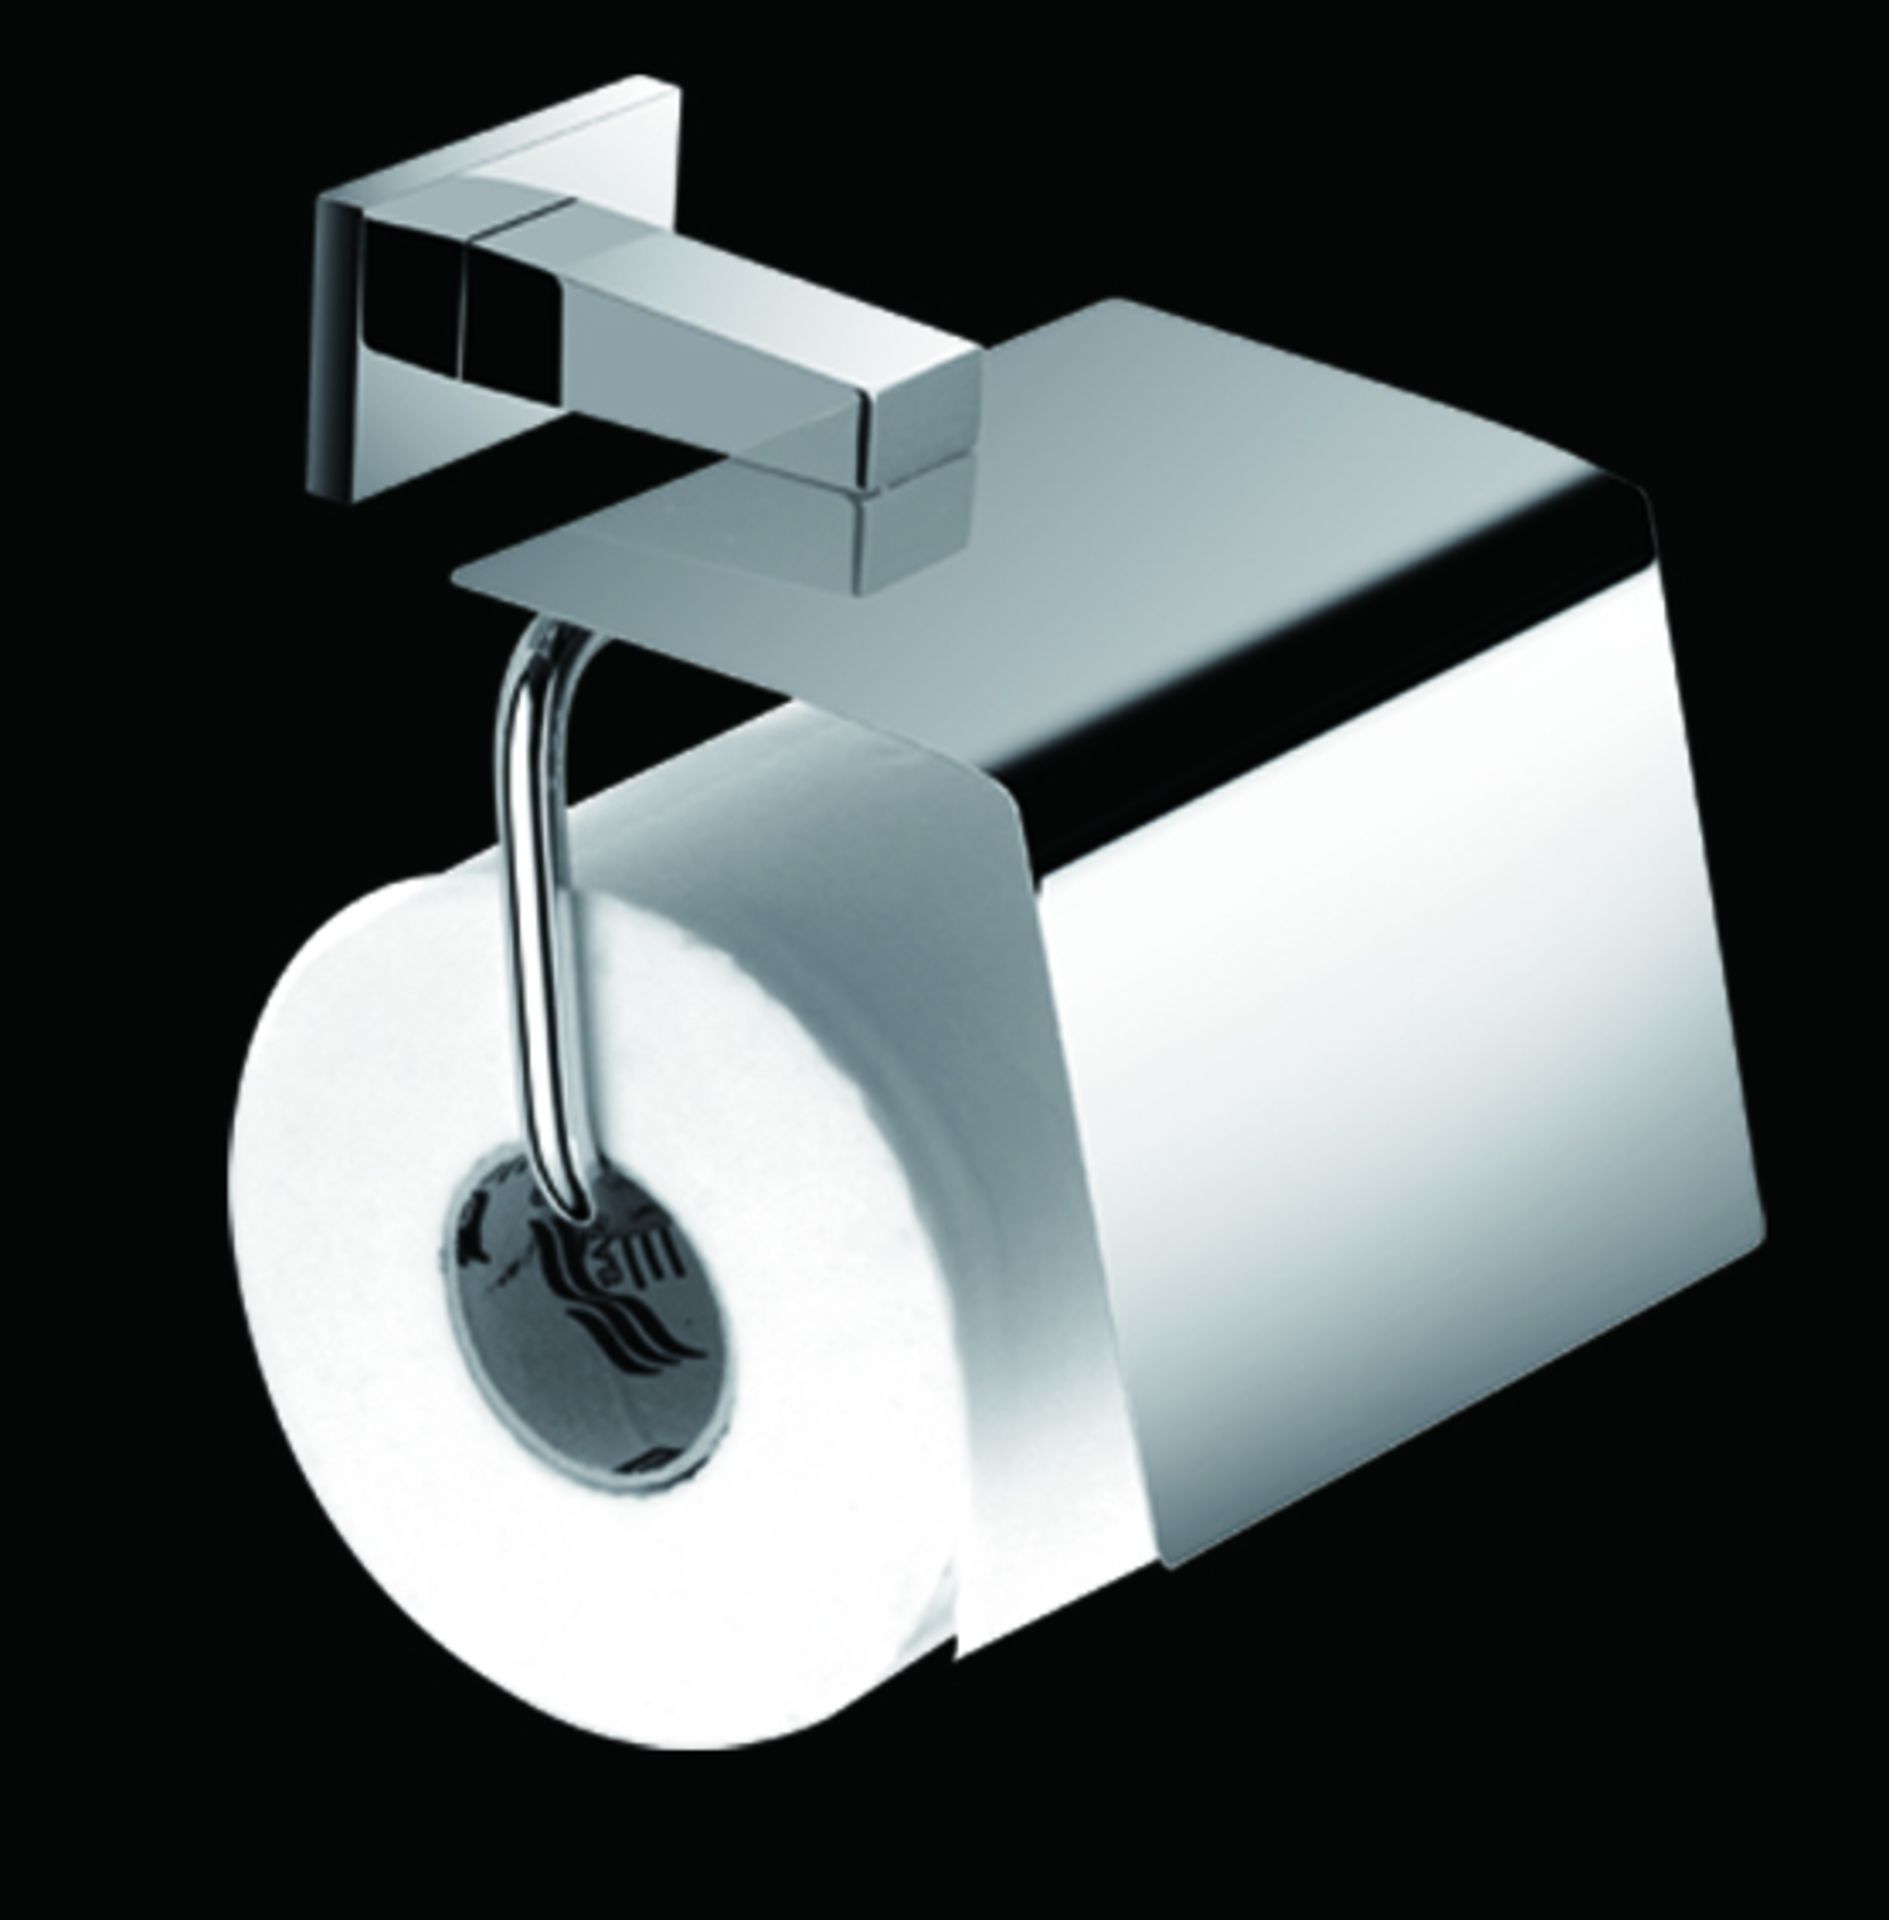 1 x Vogue Series 6 Six Piece Bathroom Accessory Set - Includes WC Roll Holder, Soap Dispenser, - Image 3 of 7